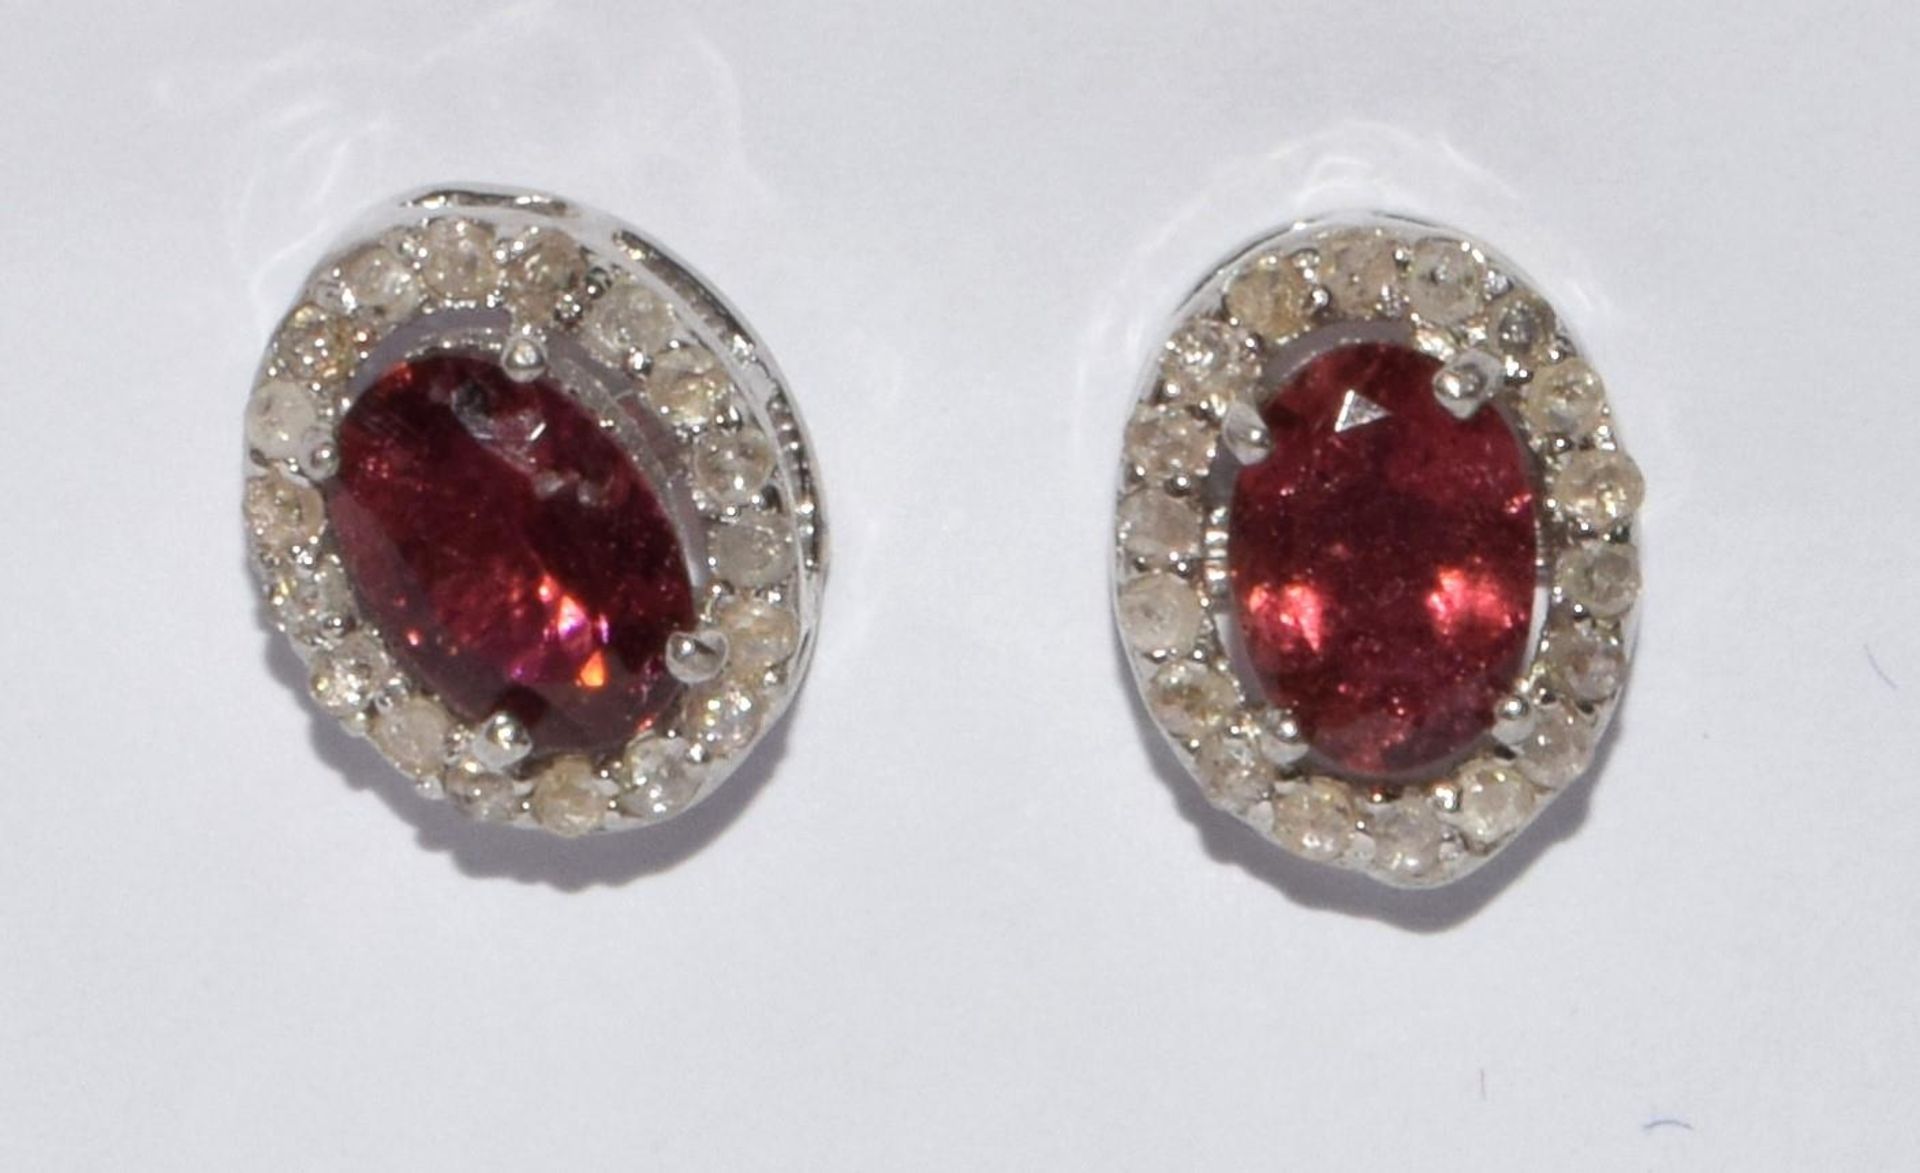 Diamond and pink tourmaline stud earrings with 18ct gold posts